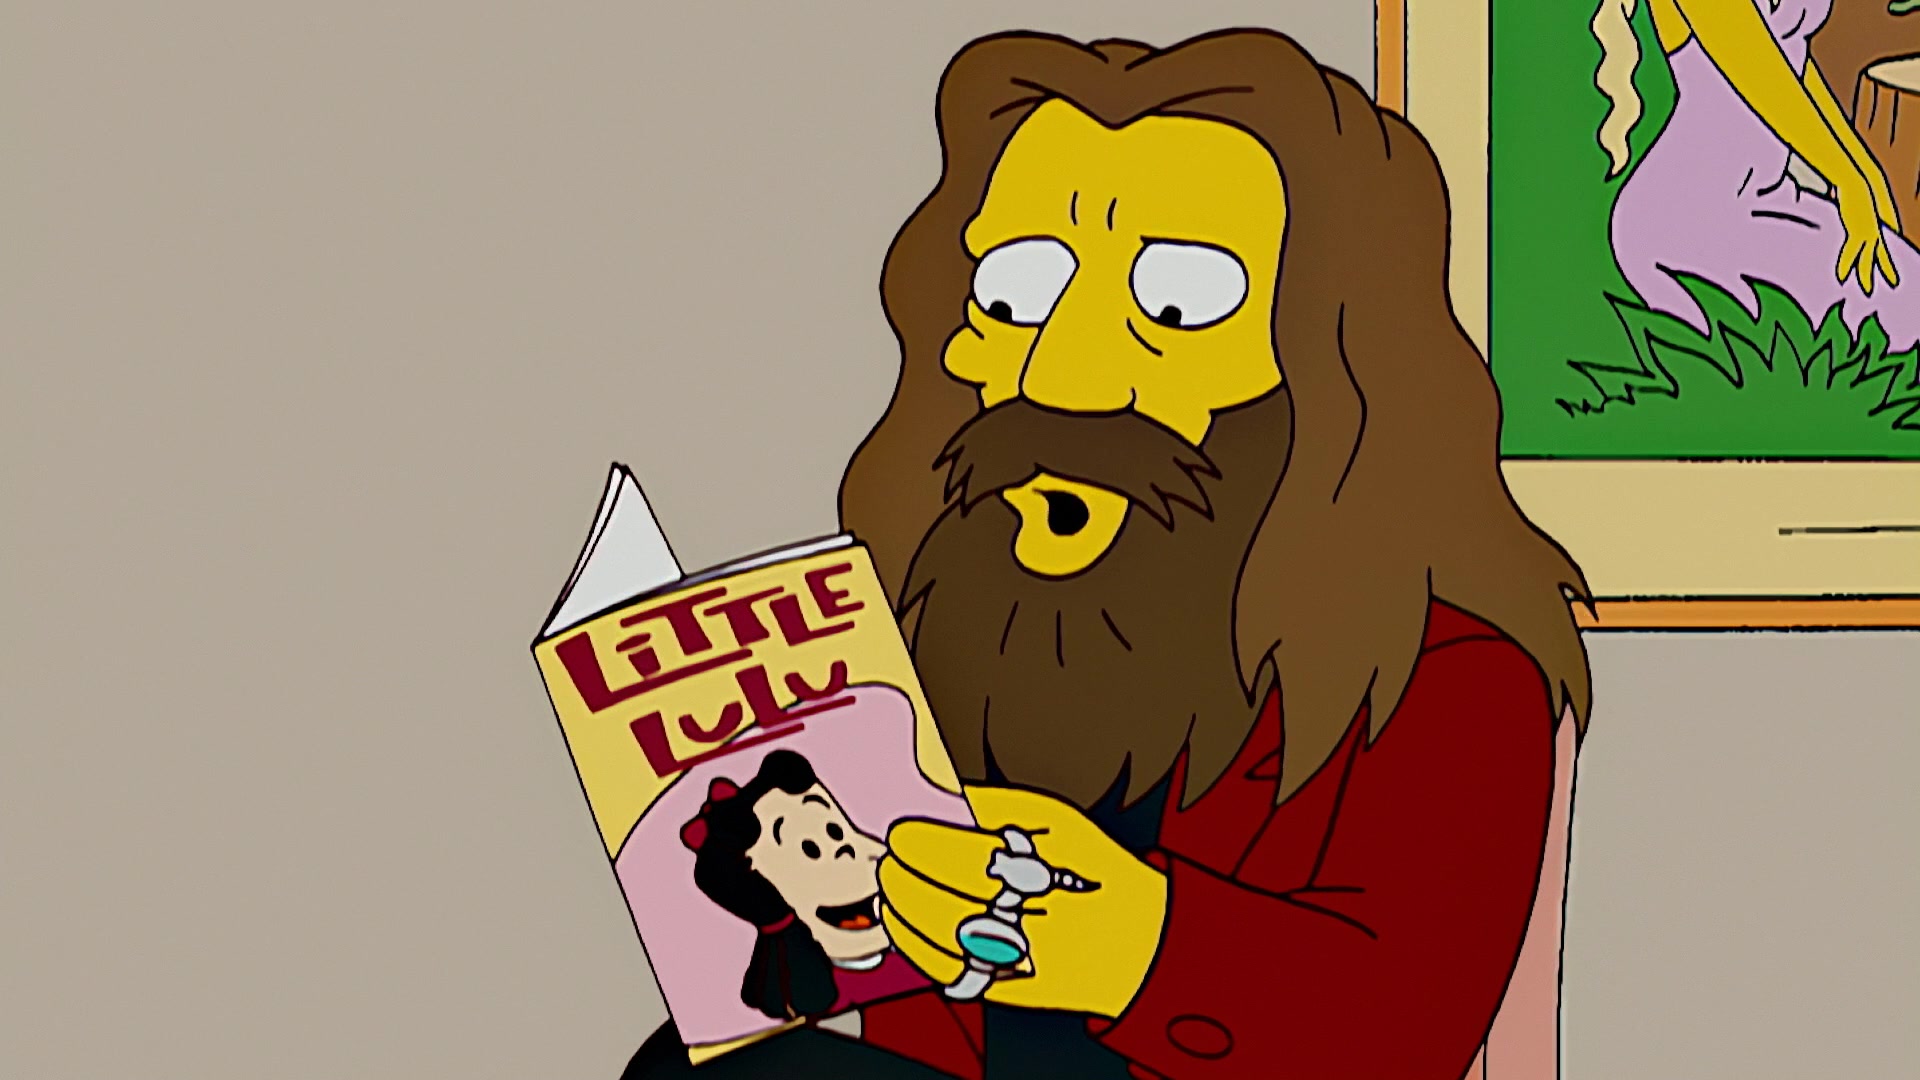 Alan Moore (Himself) enjoys an issue of Little Lulu in The Simpsons Season 19 Episode 7 "Husbands and Knives" (2007), Fox Studios